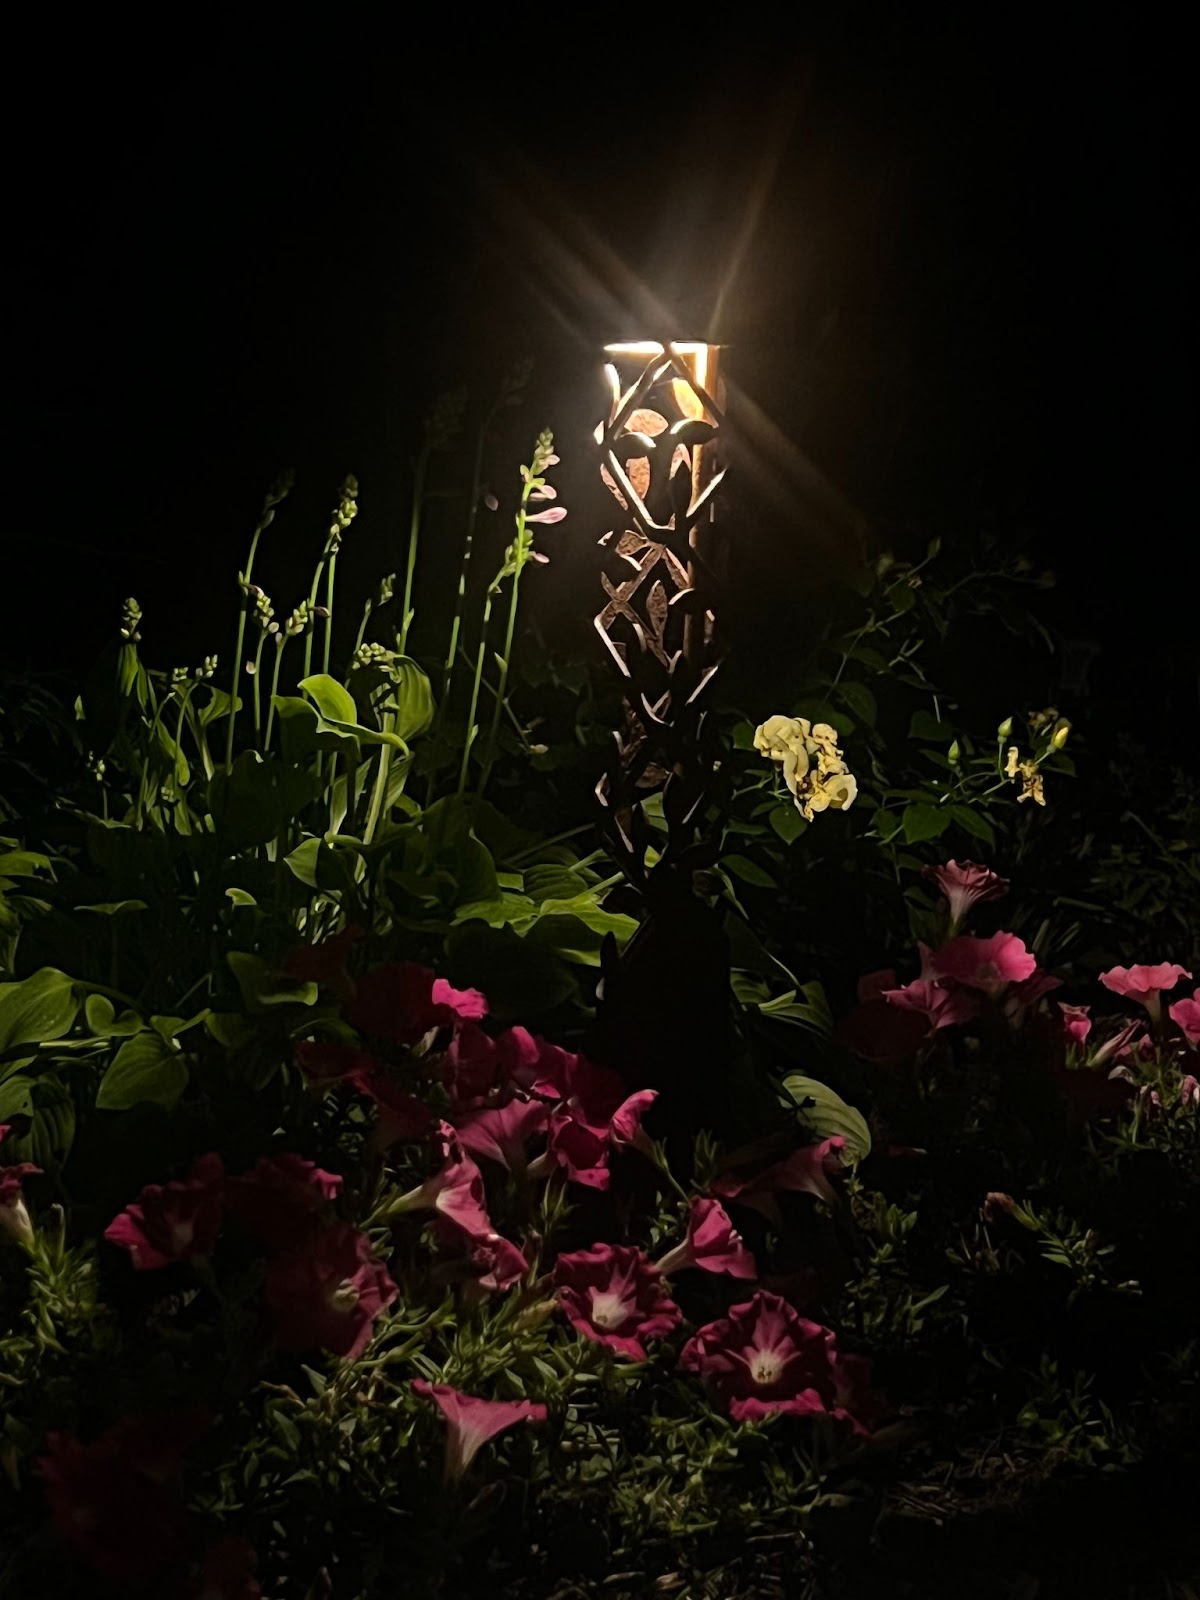 Plants and flowers are illuminated by landscape lighting